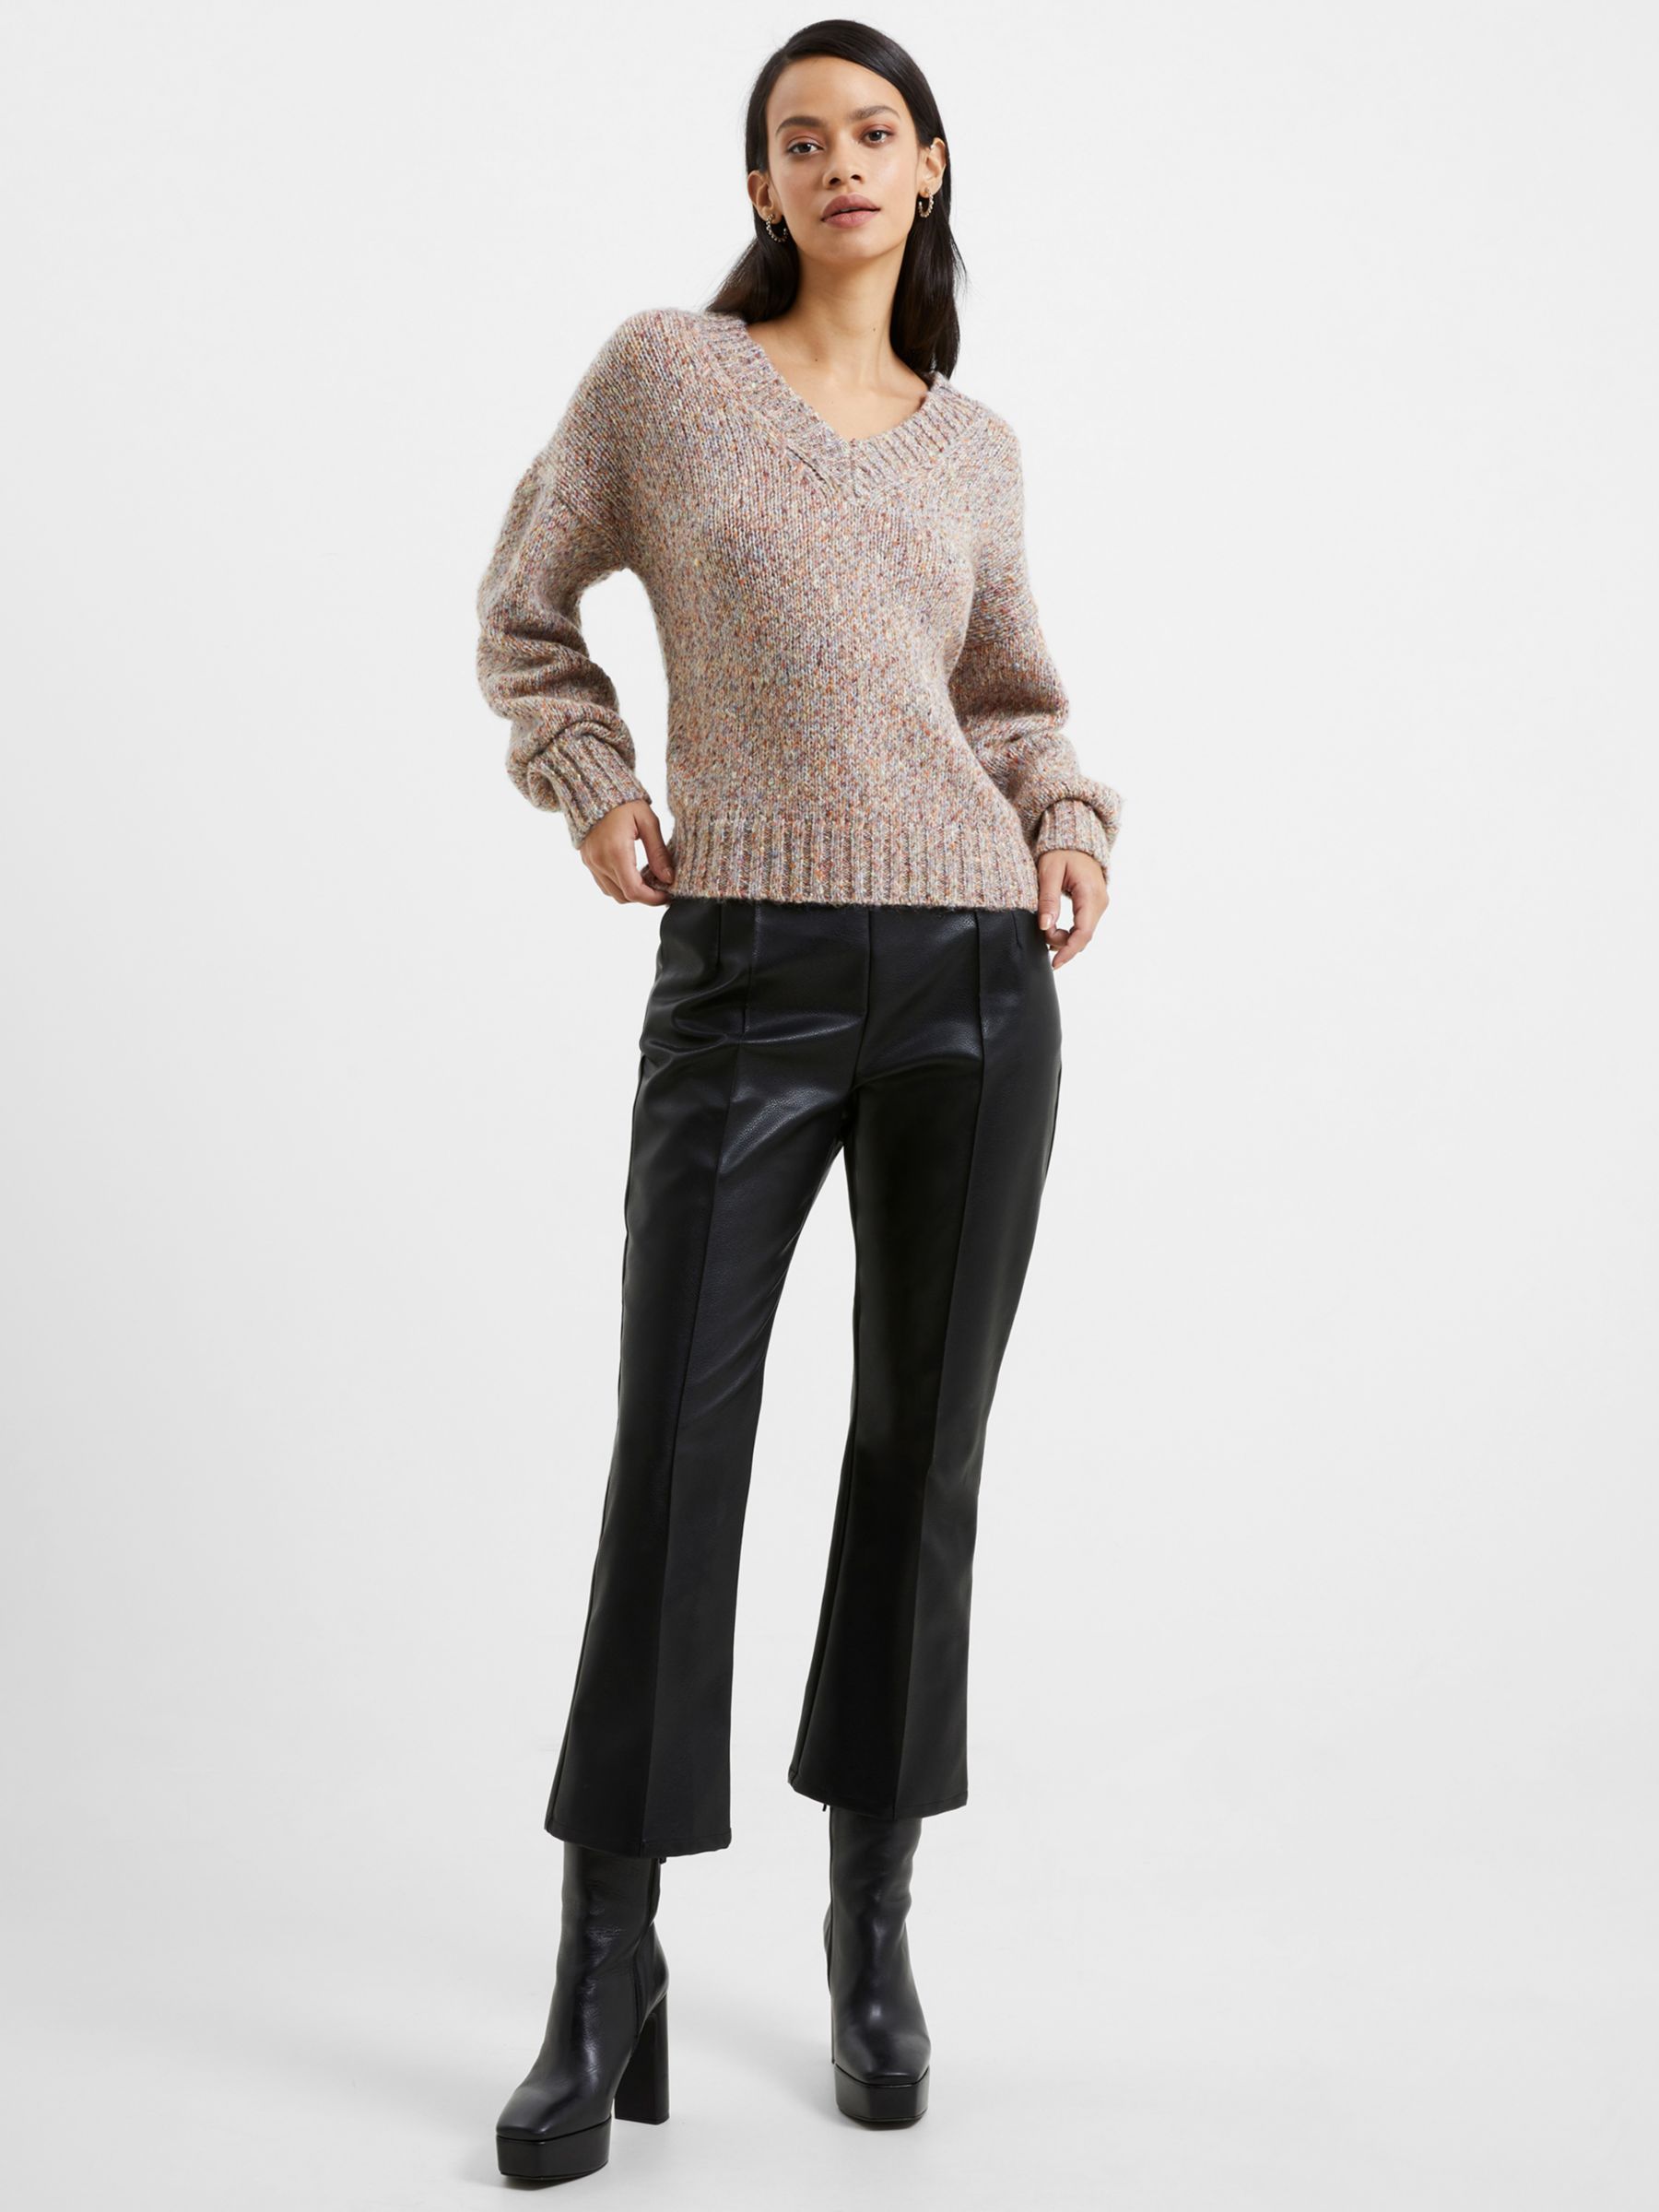 Buy French Connection Jill Marl Knit Jumper, Multi Online at johnlewis.com